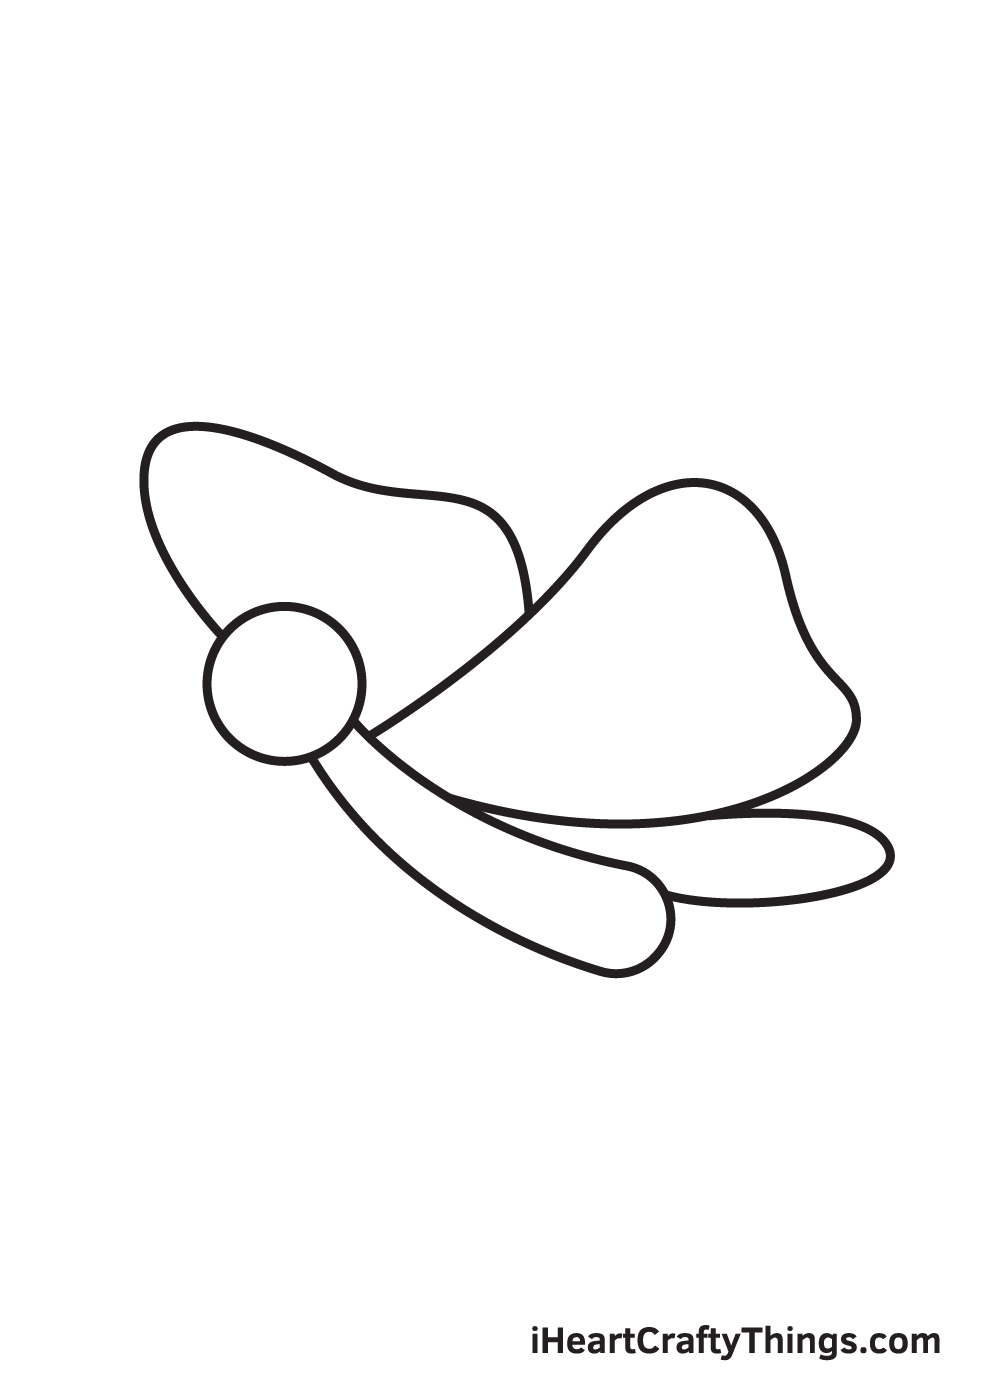 butterfly drawing – step 5